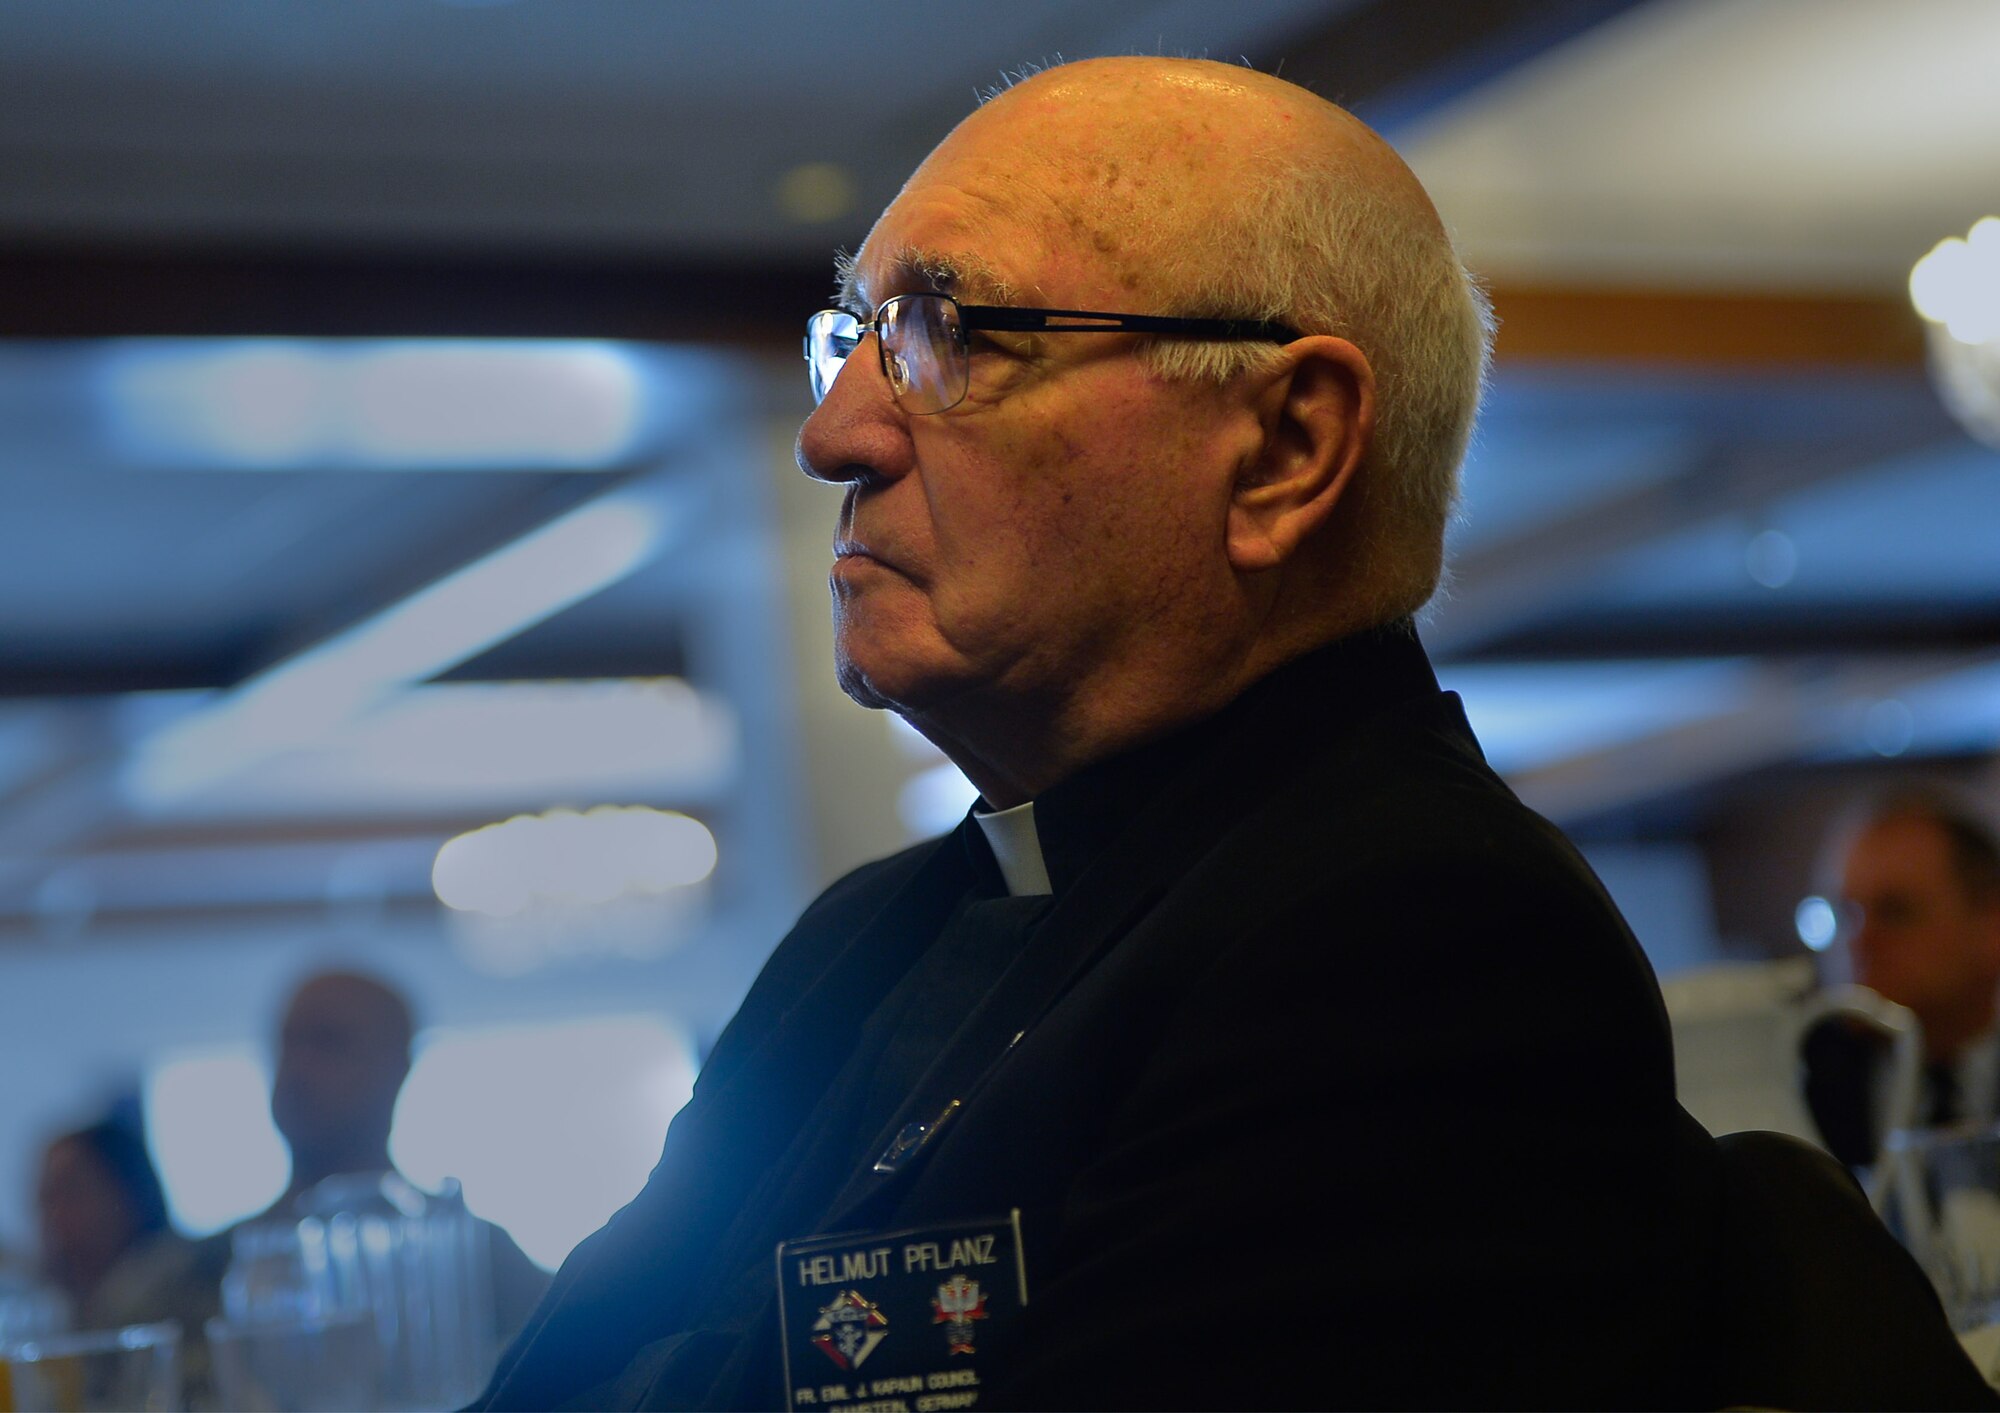 A priest attends an annual prayer breakfast on Ramstein Air Base, Germany, March 13, 2017. The 86th Airlift Wing Chaplain Corps hosted the interdenominational event, which celebrates the freedom of religion. The prayer breakfast saw participation from all branches of the military as well as civilians. (U.S. Air Force photo by Airman 1st Class Joshua Magbanua)